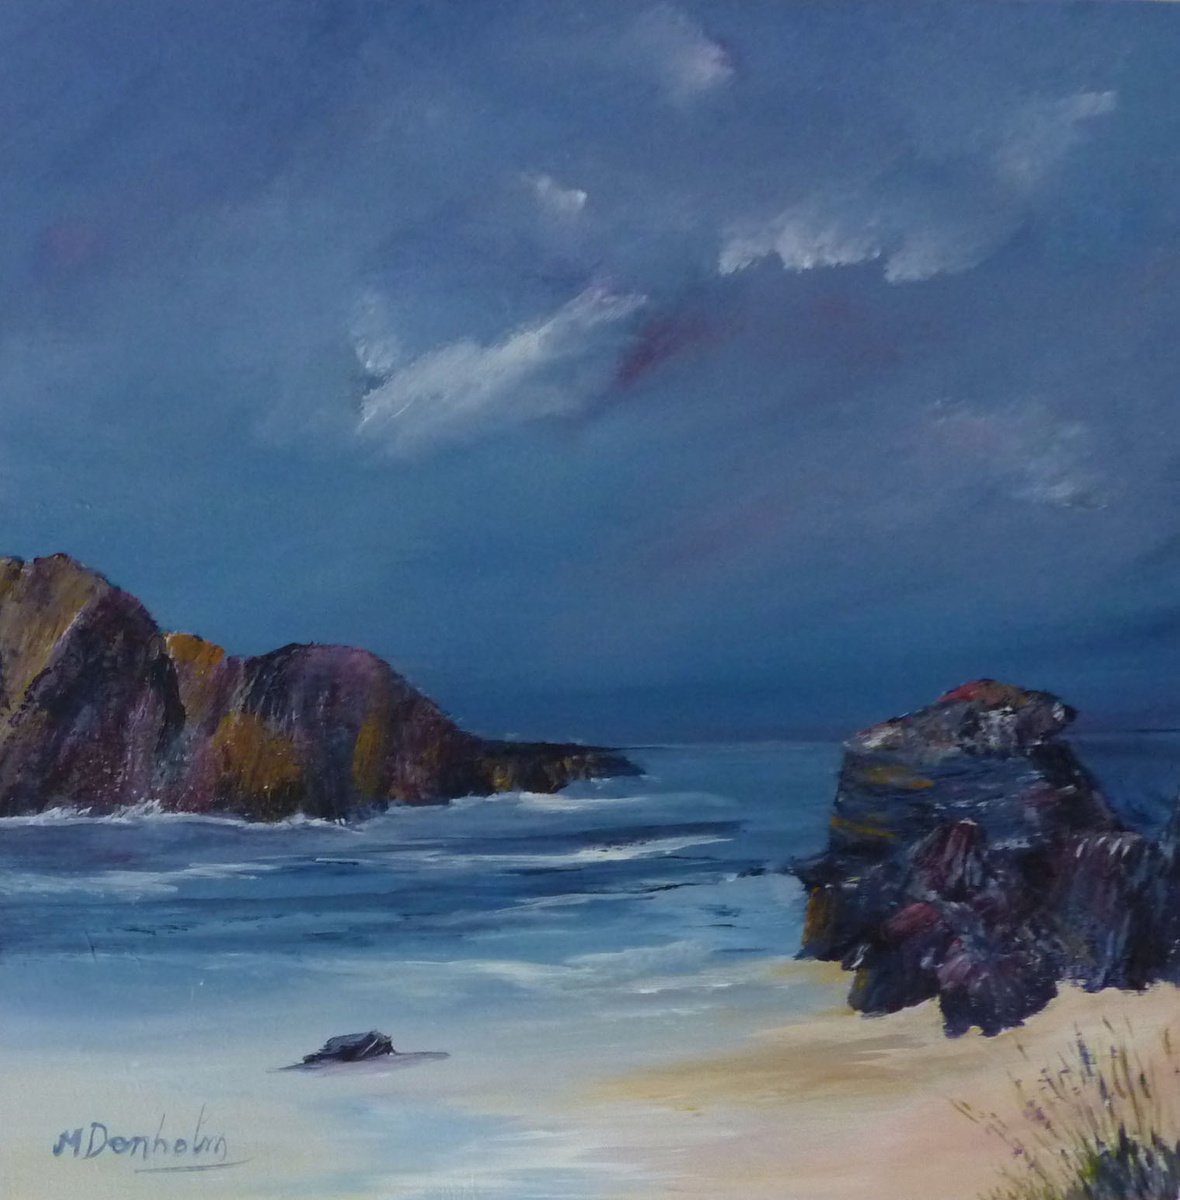 The Lonely Sea & The Sky - A Scottish Seascape by Margaret Denholm